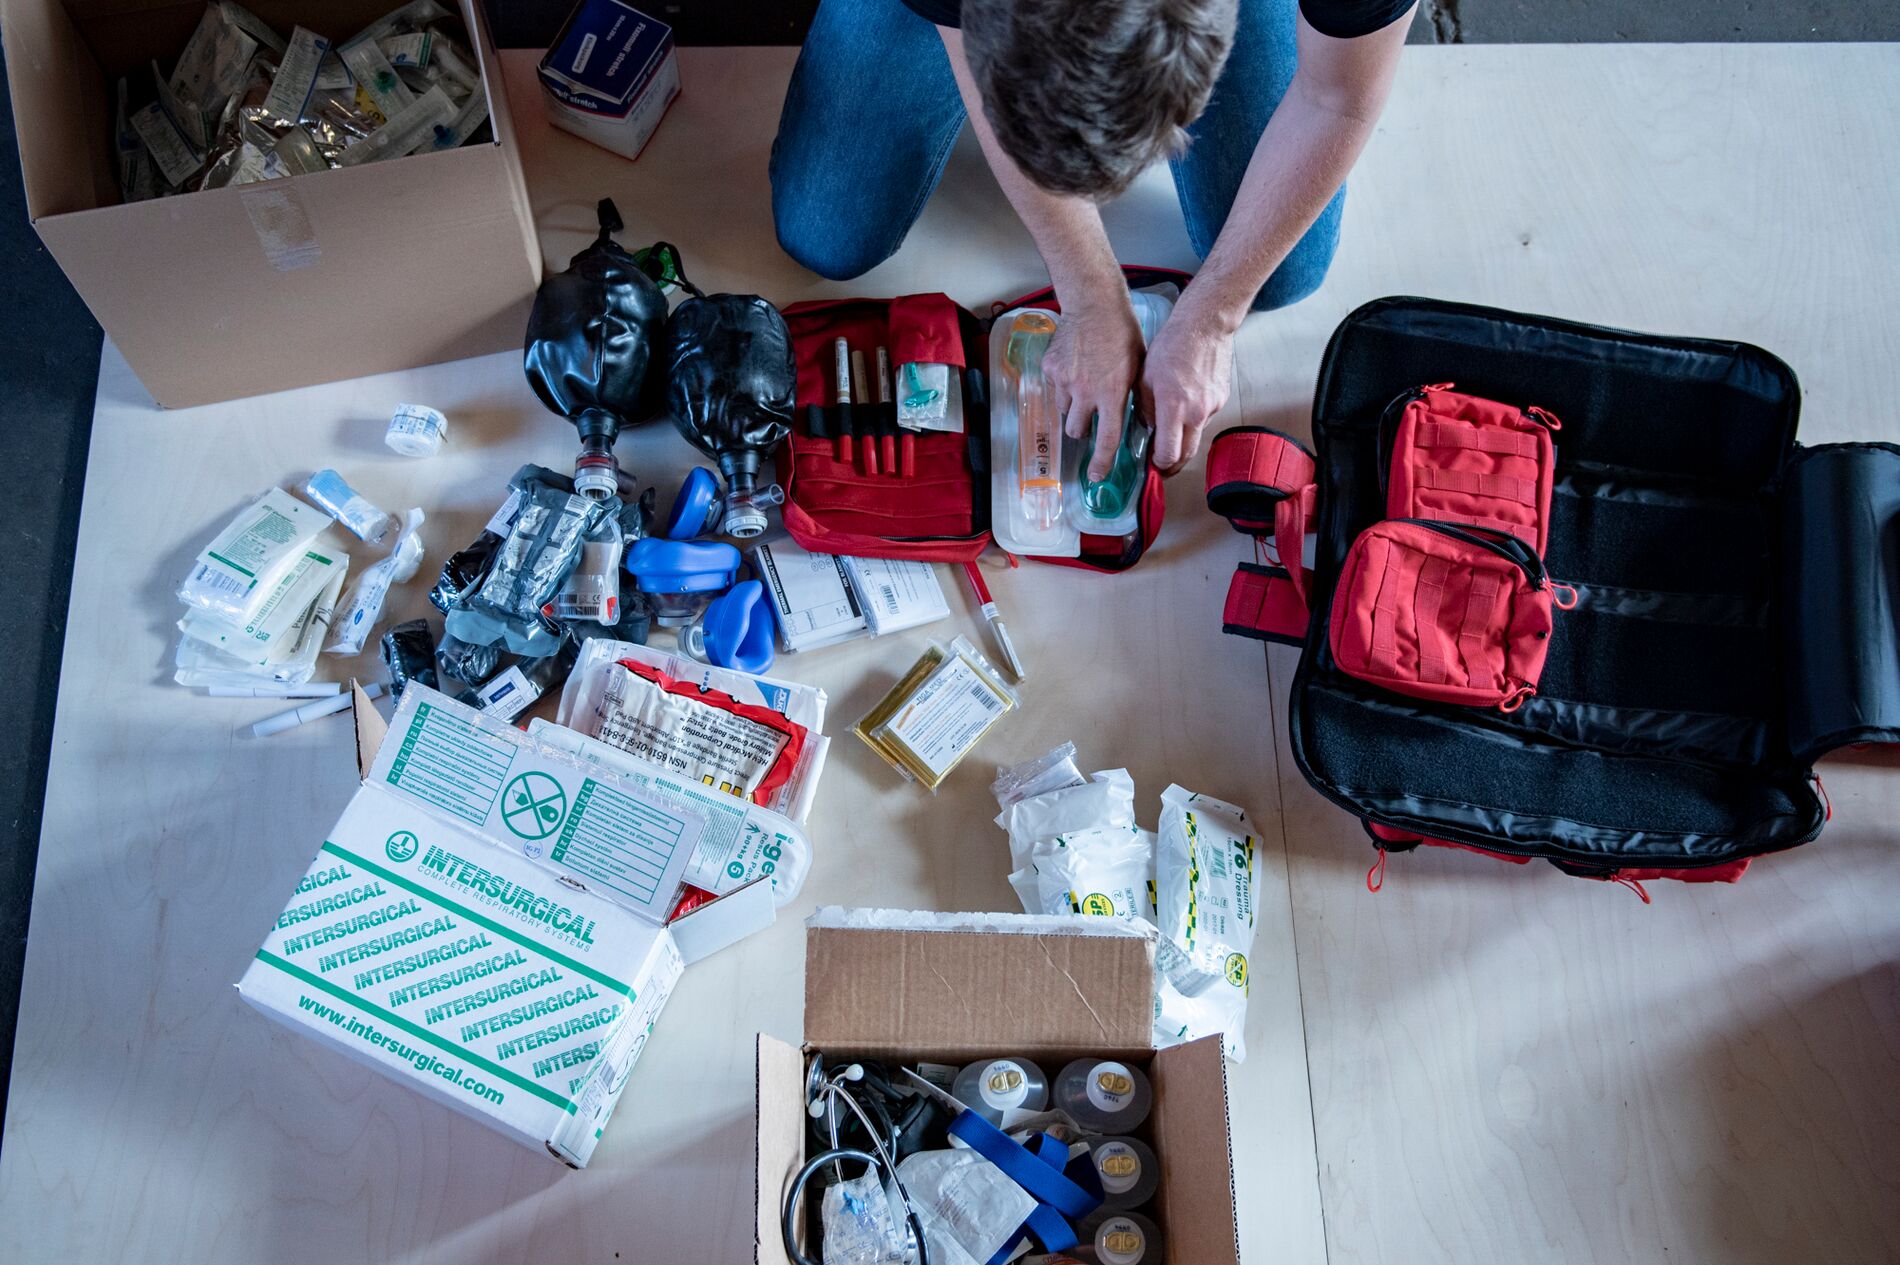 A rescue bag is being packed for a deployment. ©Christoph Löffler